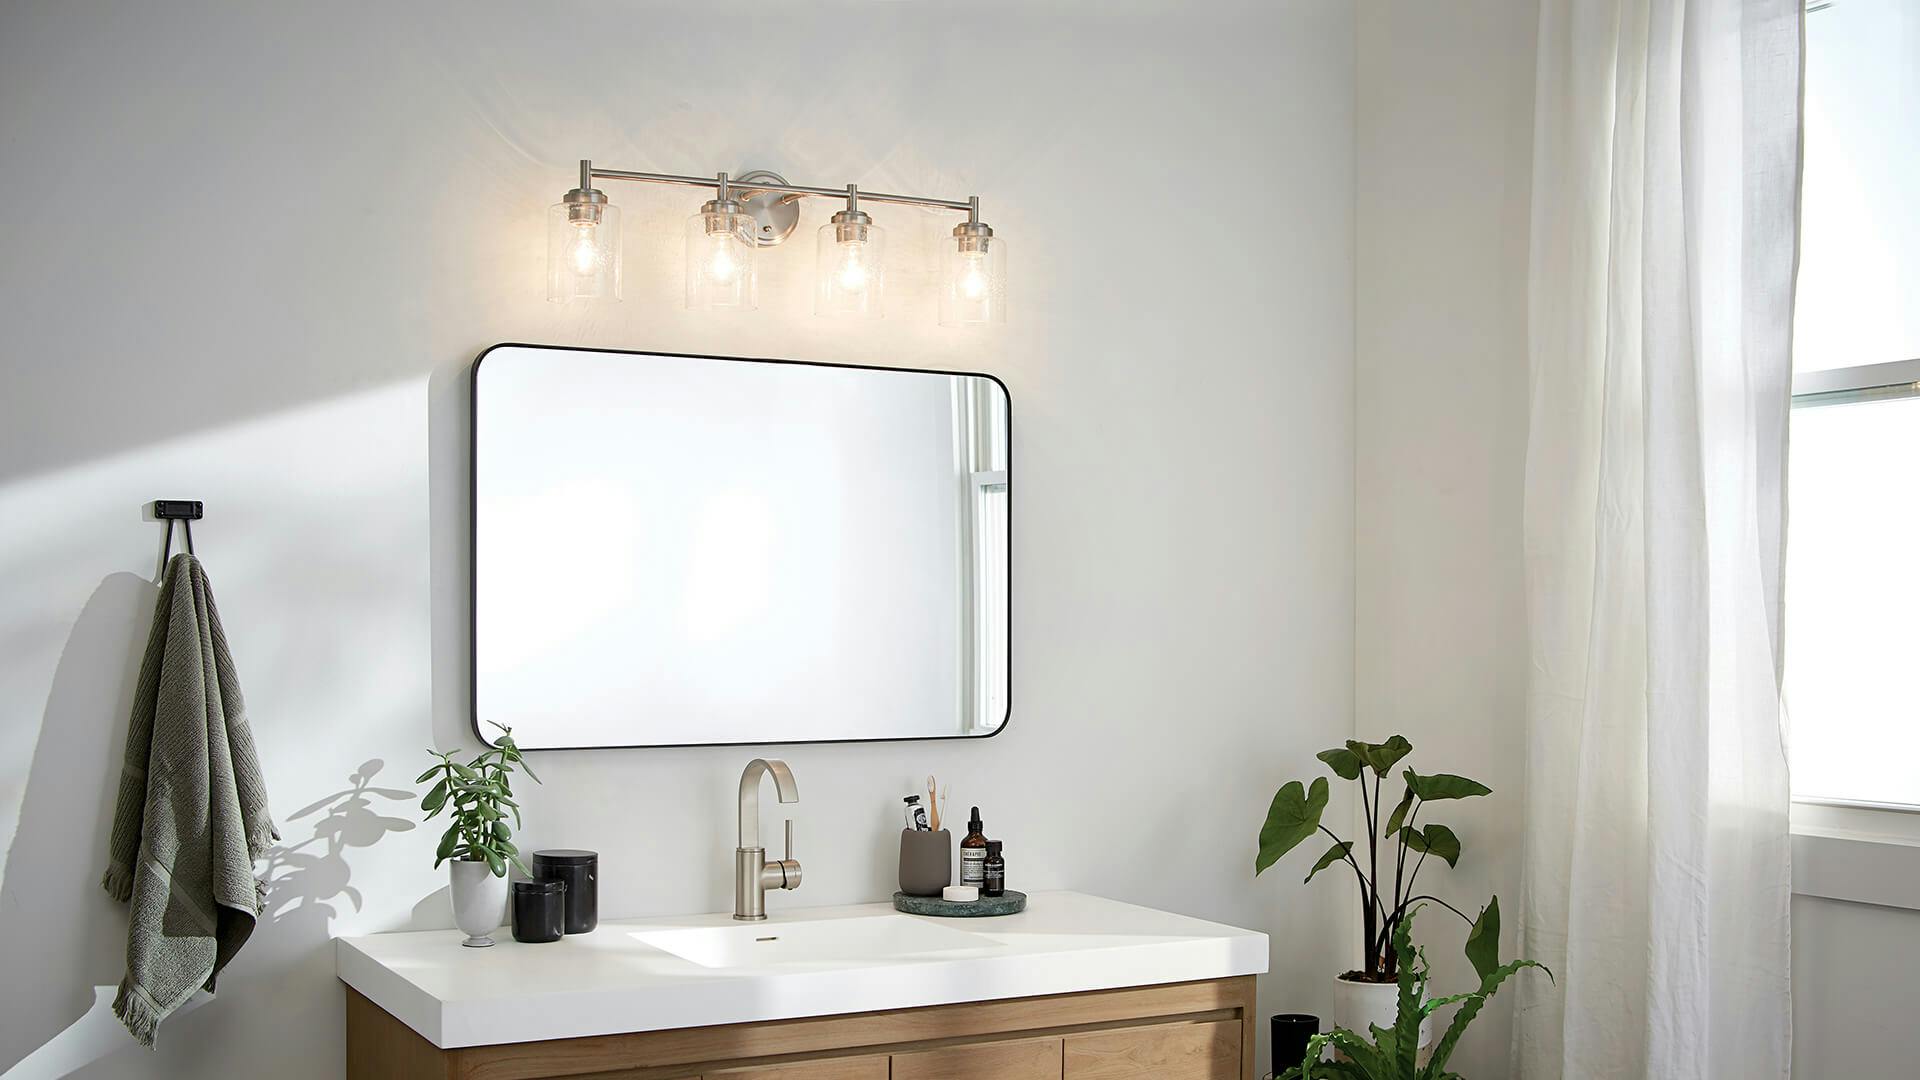 Winslow vanity light in brushed nickel in bathroom during the day.